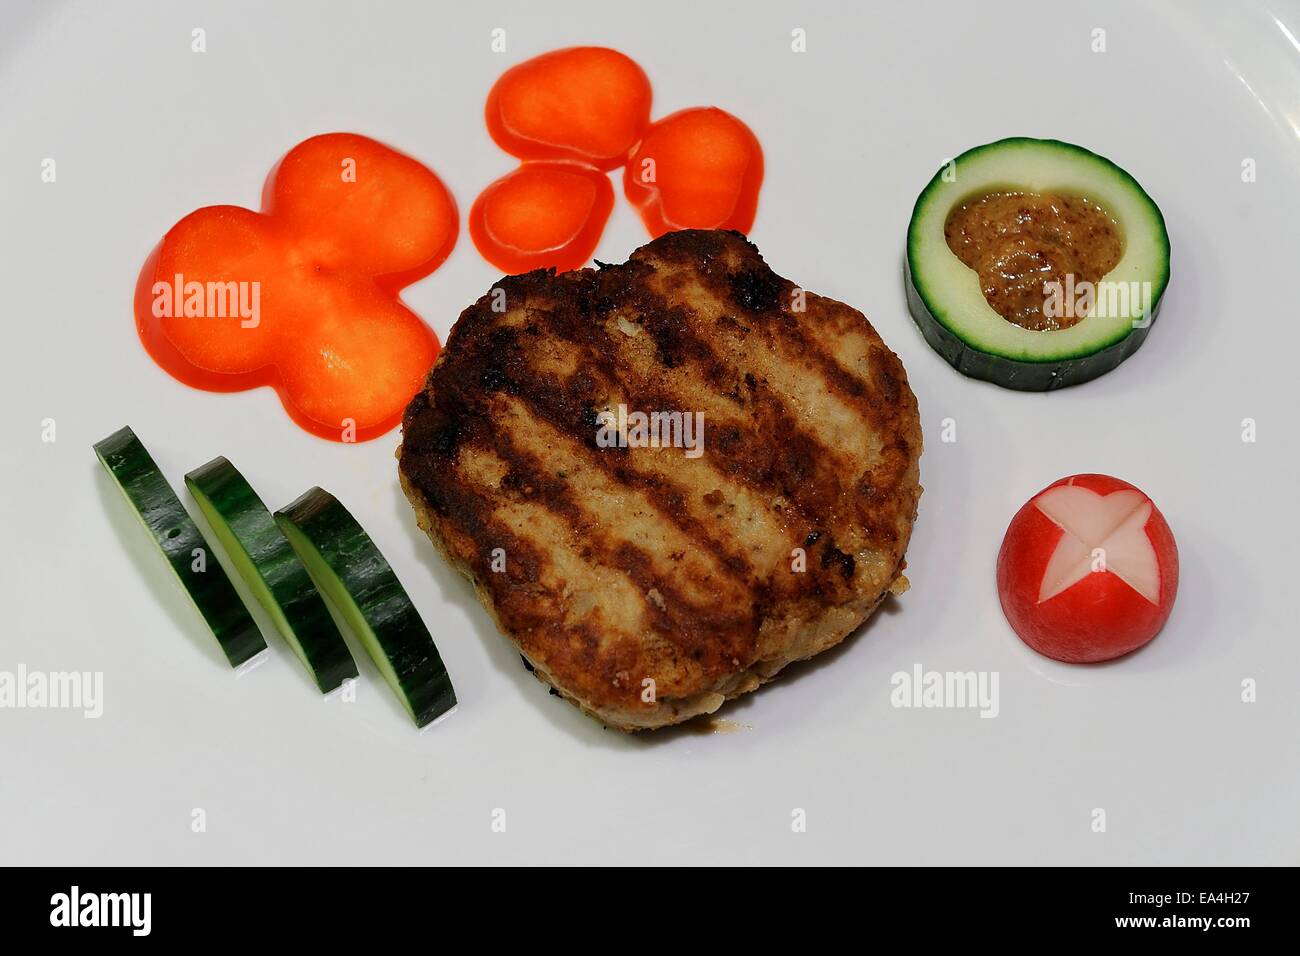 Rissole snack with cucumber Stock Photo